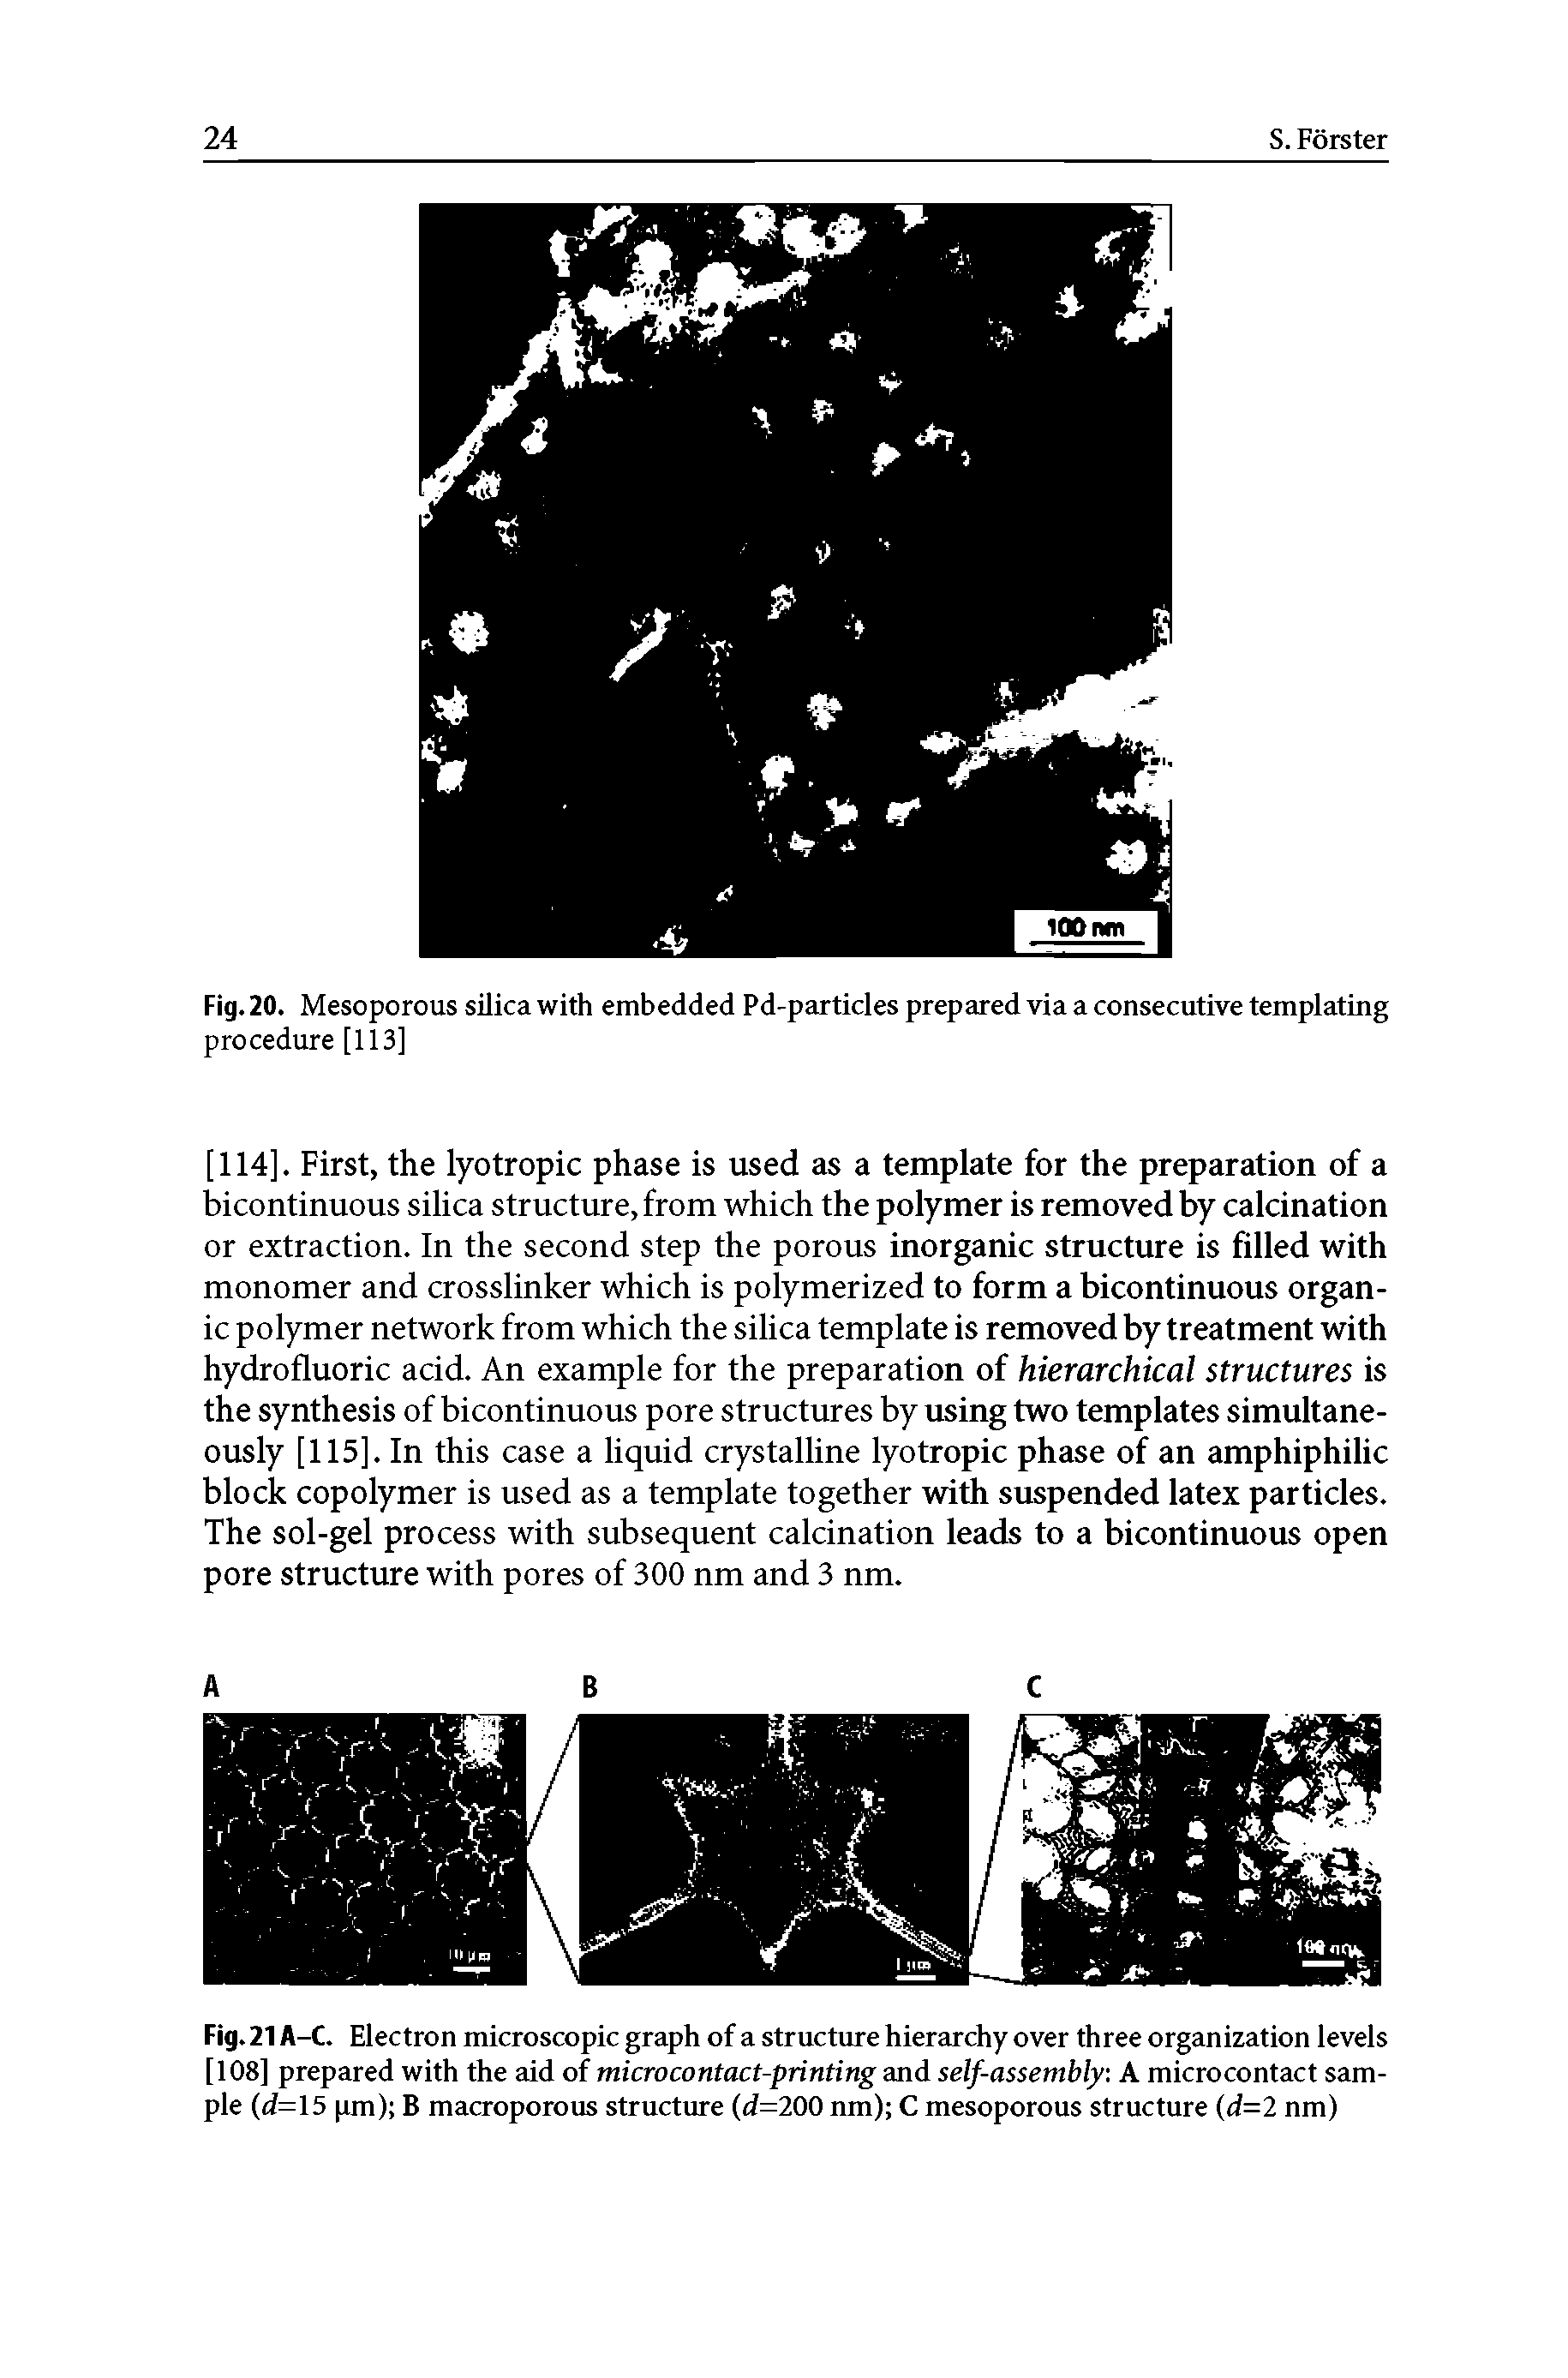 Fig. 21A-C. Electron microscopic graph of a structure hierarchy over three organization levels [108] prepared with the aid of microcontact-printing and self-assembly A microcontact sample (d=15 pm) B macroporous structirre (d=200 nm) C mesoporous structure (d=2 nm)...